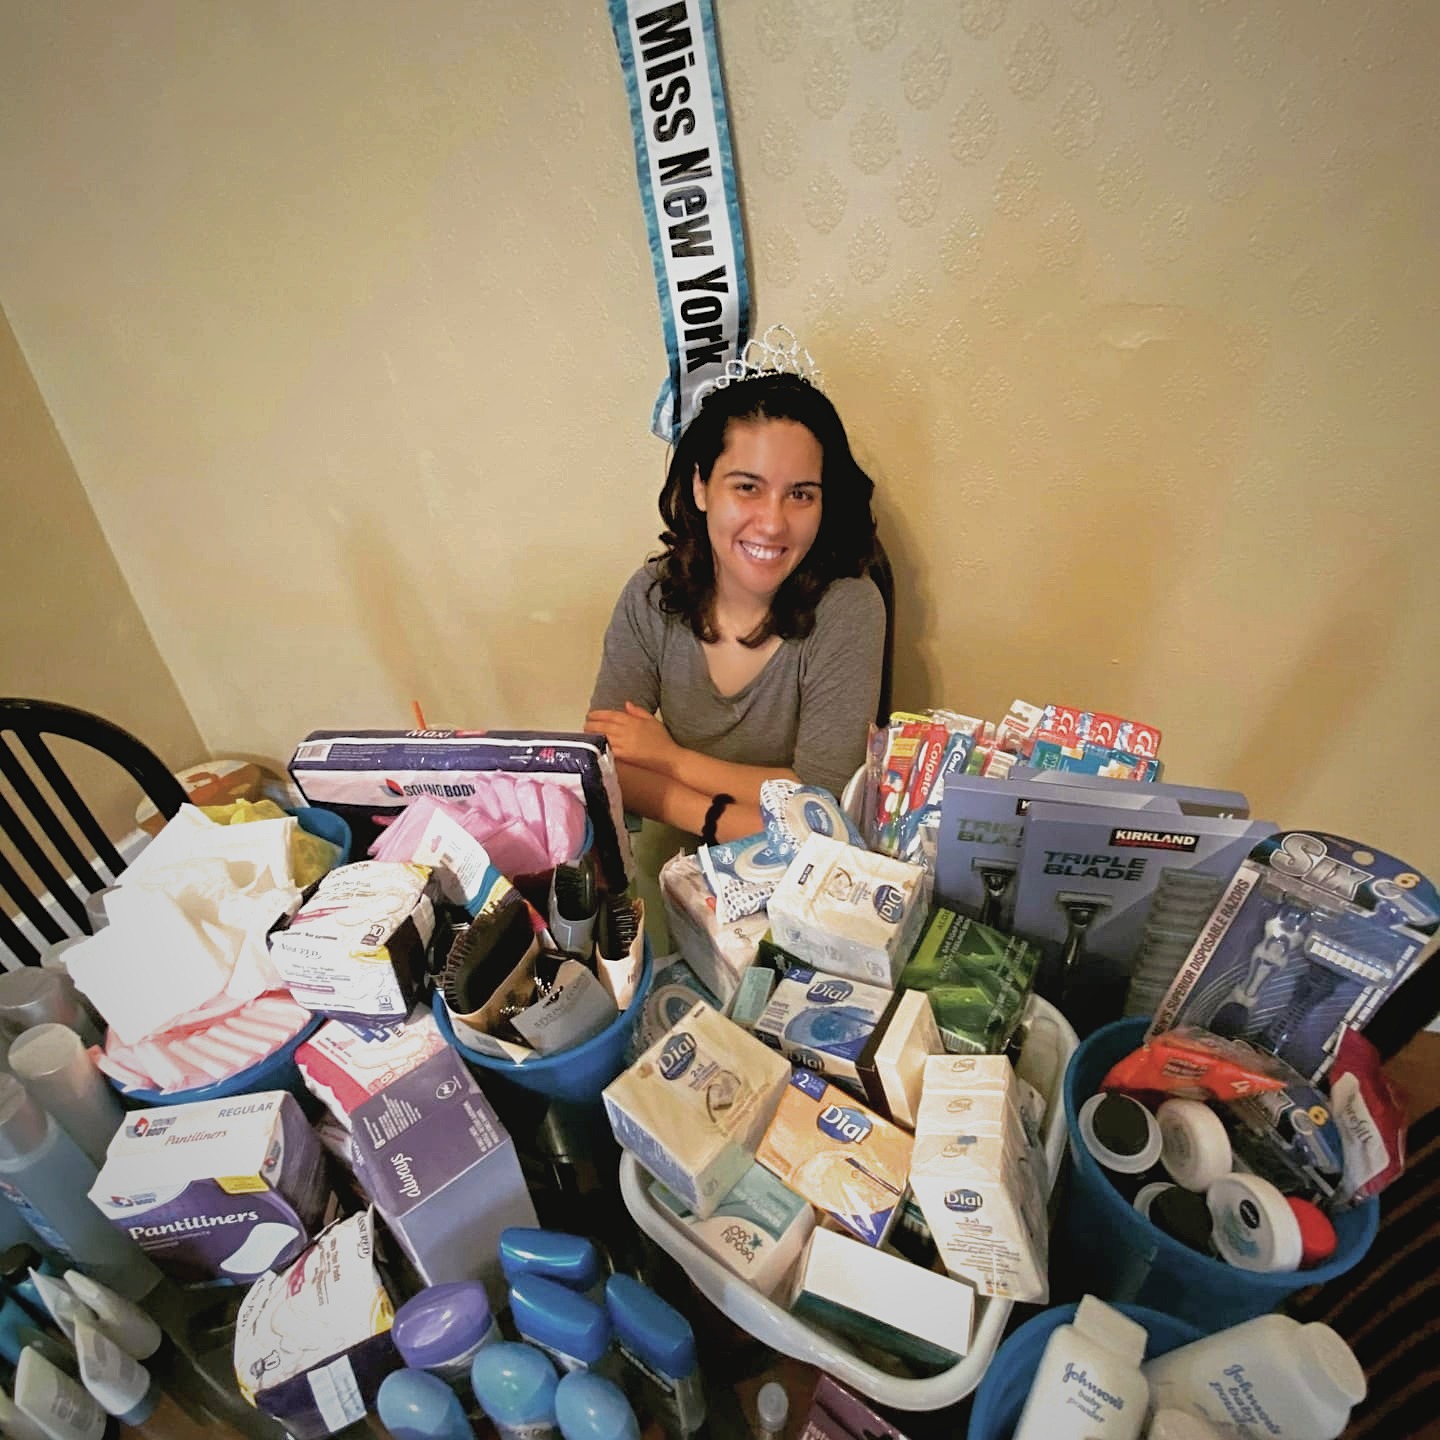 Woman embarks on project to collect 3,500 bras for homeless women